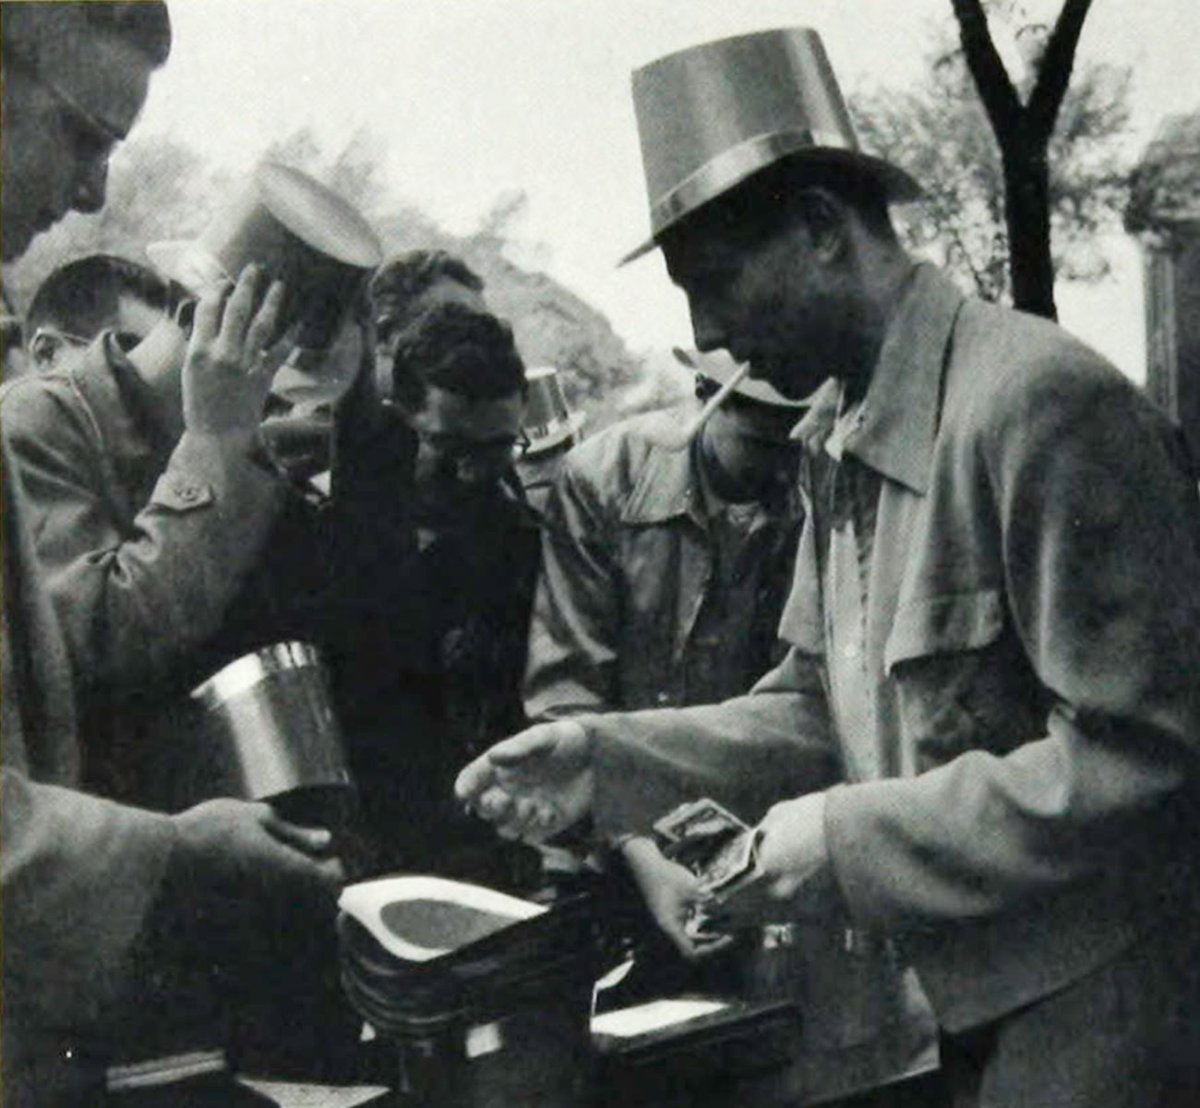 In 1953, A huckstering engineer sells traditional green hat, clenches a clay pipe in his teeth. Hats help separate genuine IT men from crowds attending ceremonies